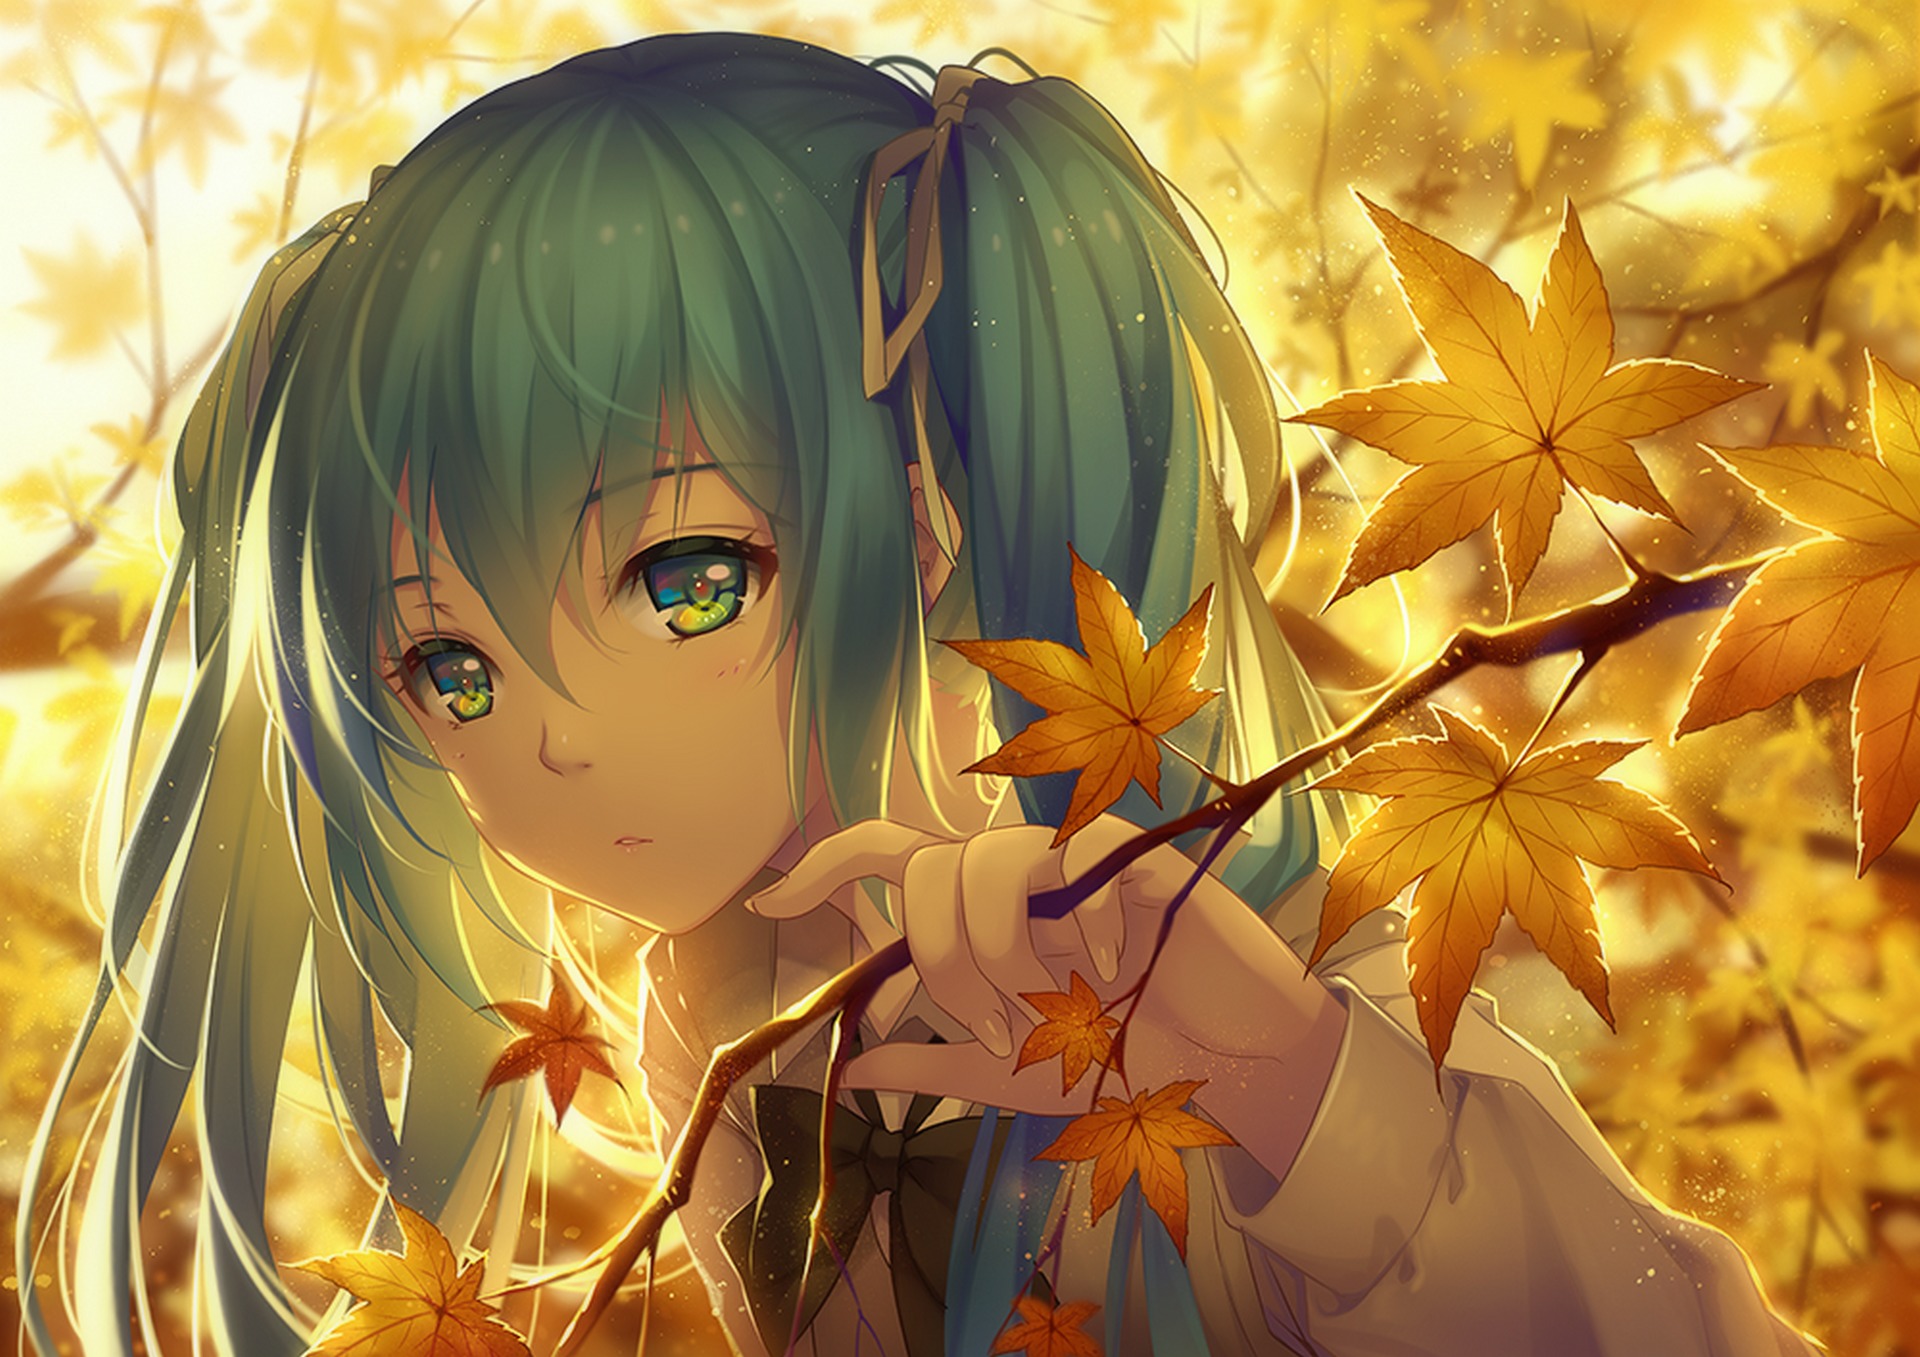 bow (clothing), blue eyes, fall, hatsune miku, anime, vocaloid, leaf, long hair, blue hair, twintails High Definition image